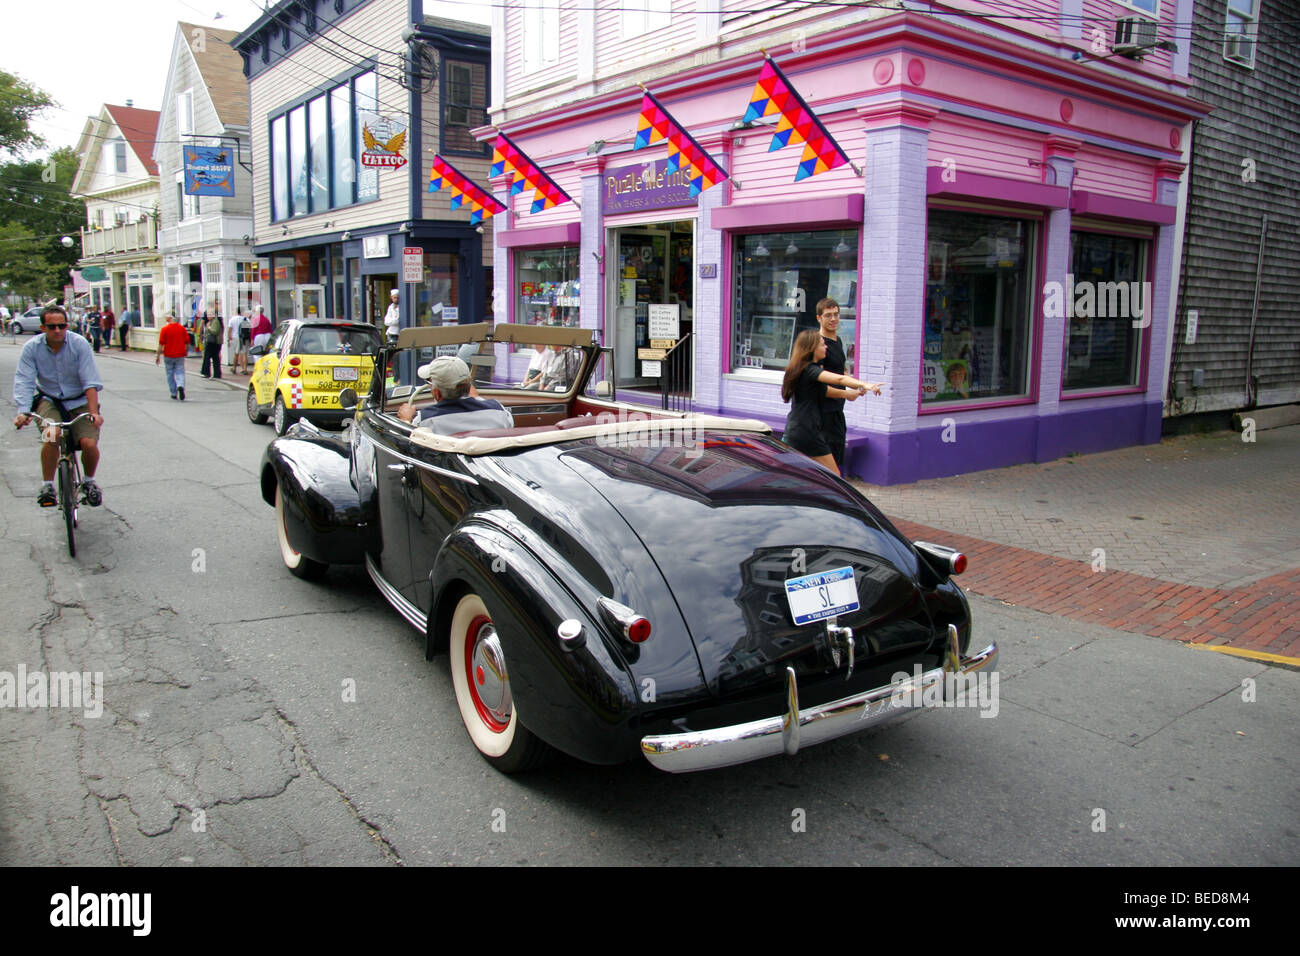 Classic old car driving along Commercial Avenue, Provincetown, Massachusetts, USA Stock Photo